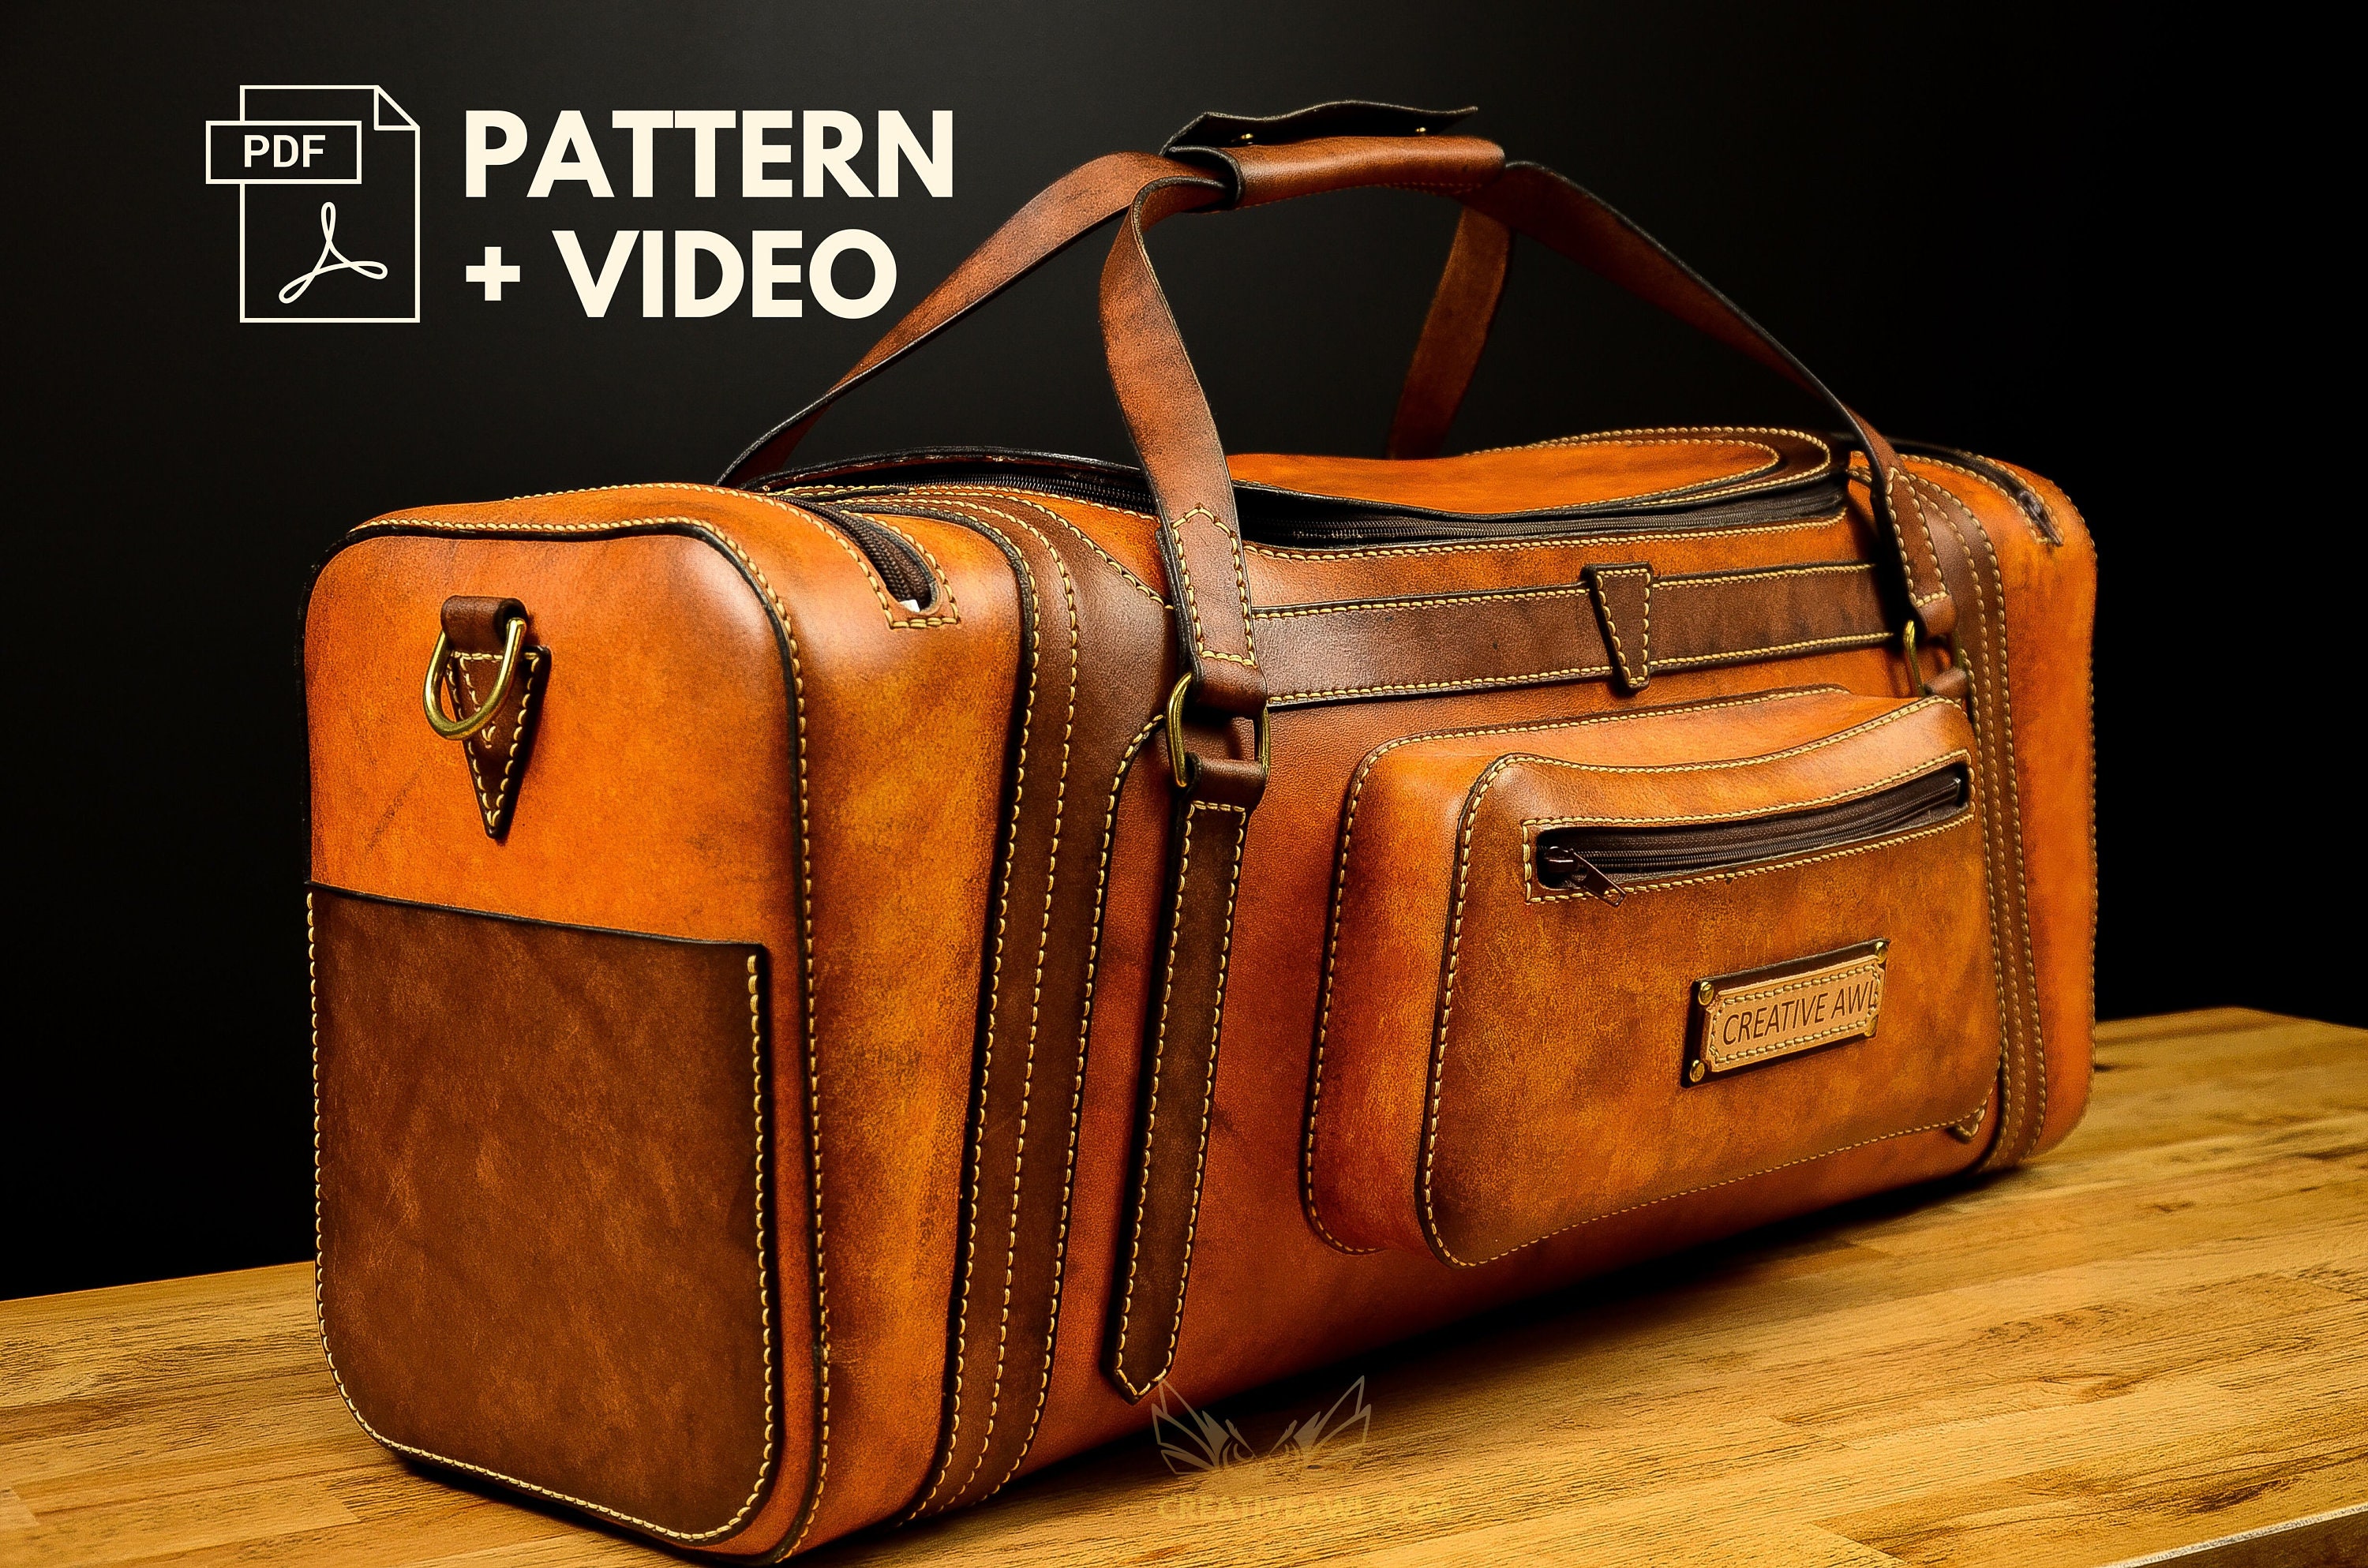 Leather Bag Pattern - Leather Duffle Bag pattern - Leather Pattern - Weekender Bag - Leather ...